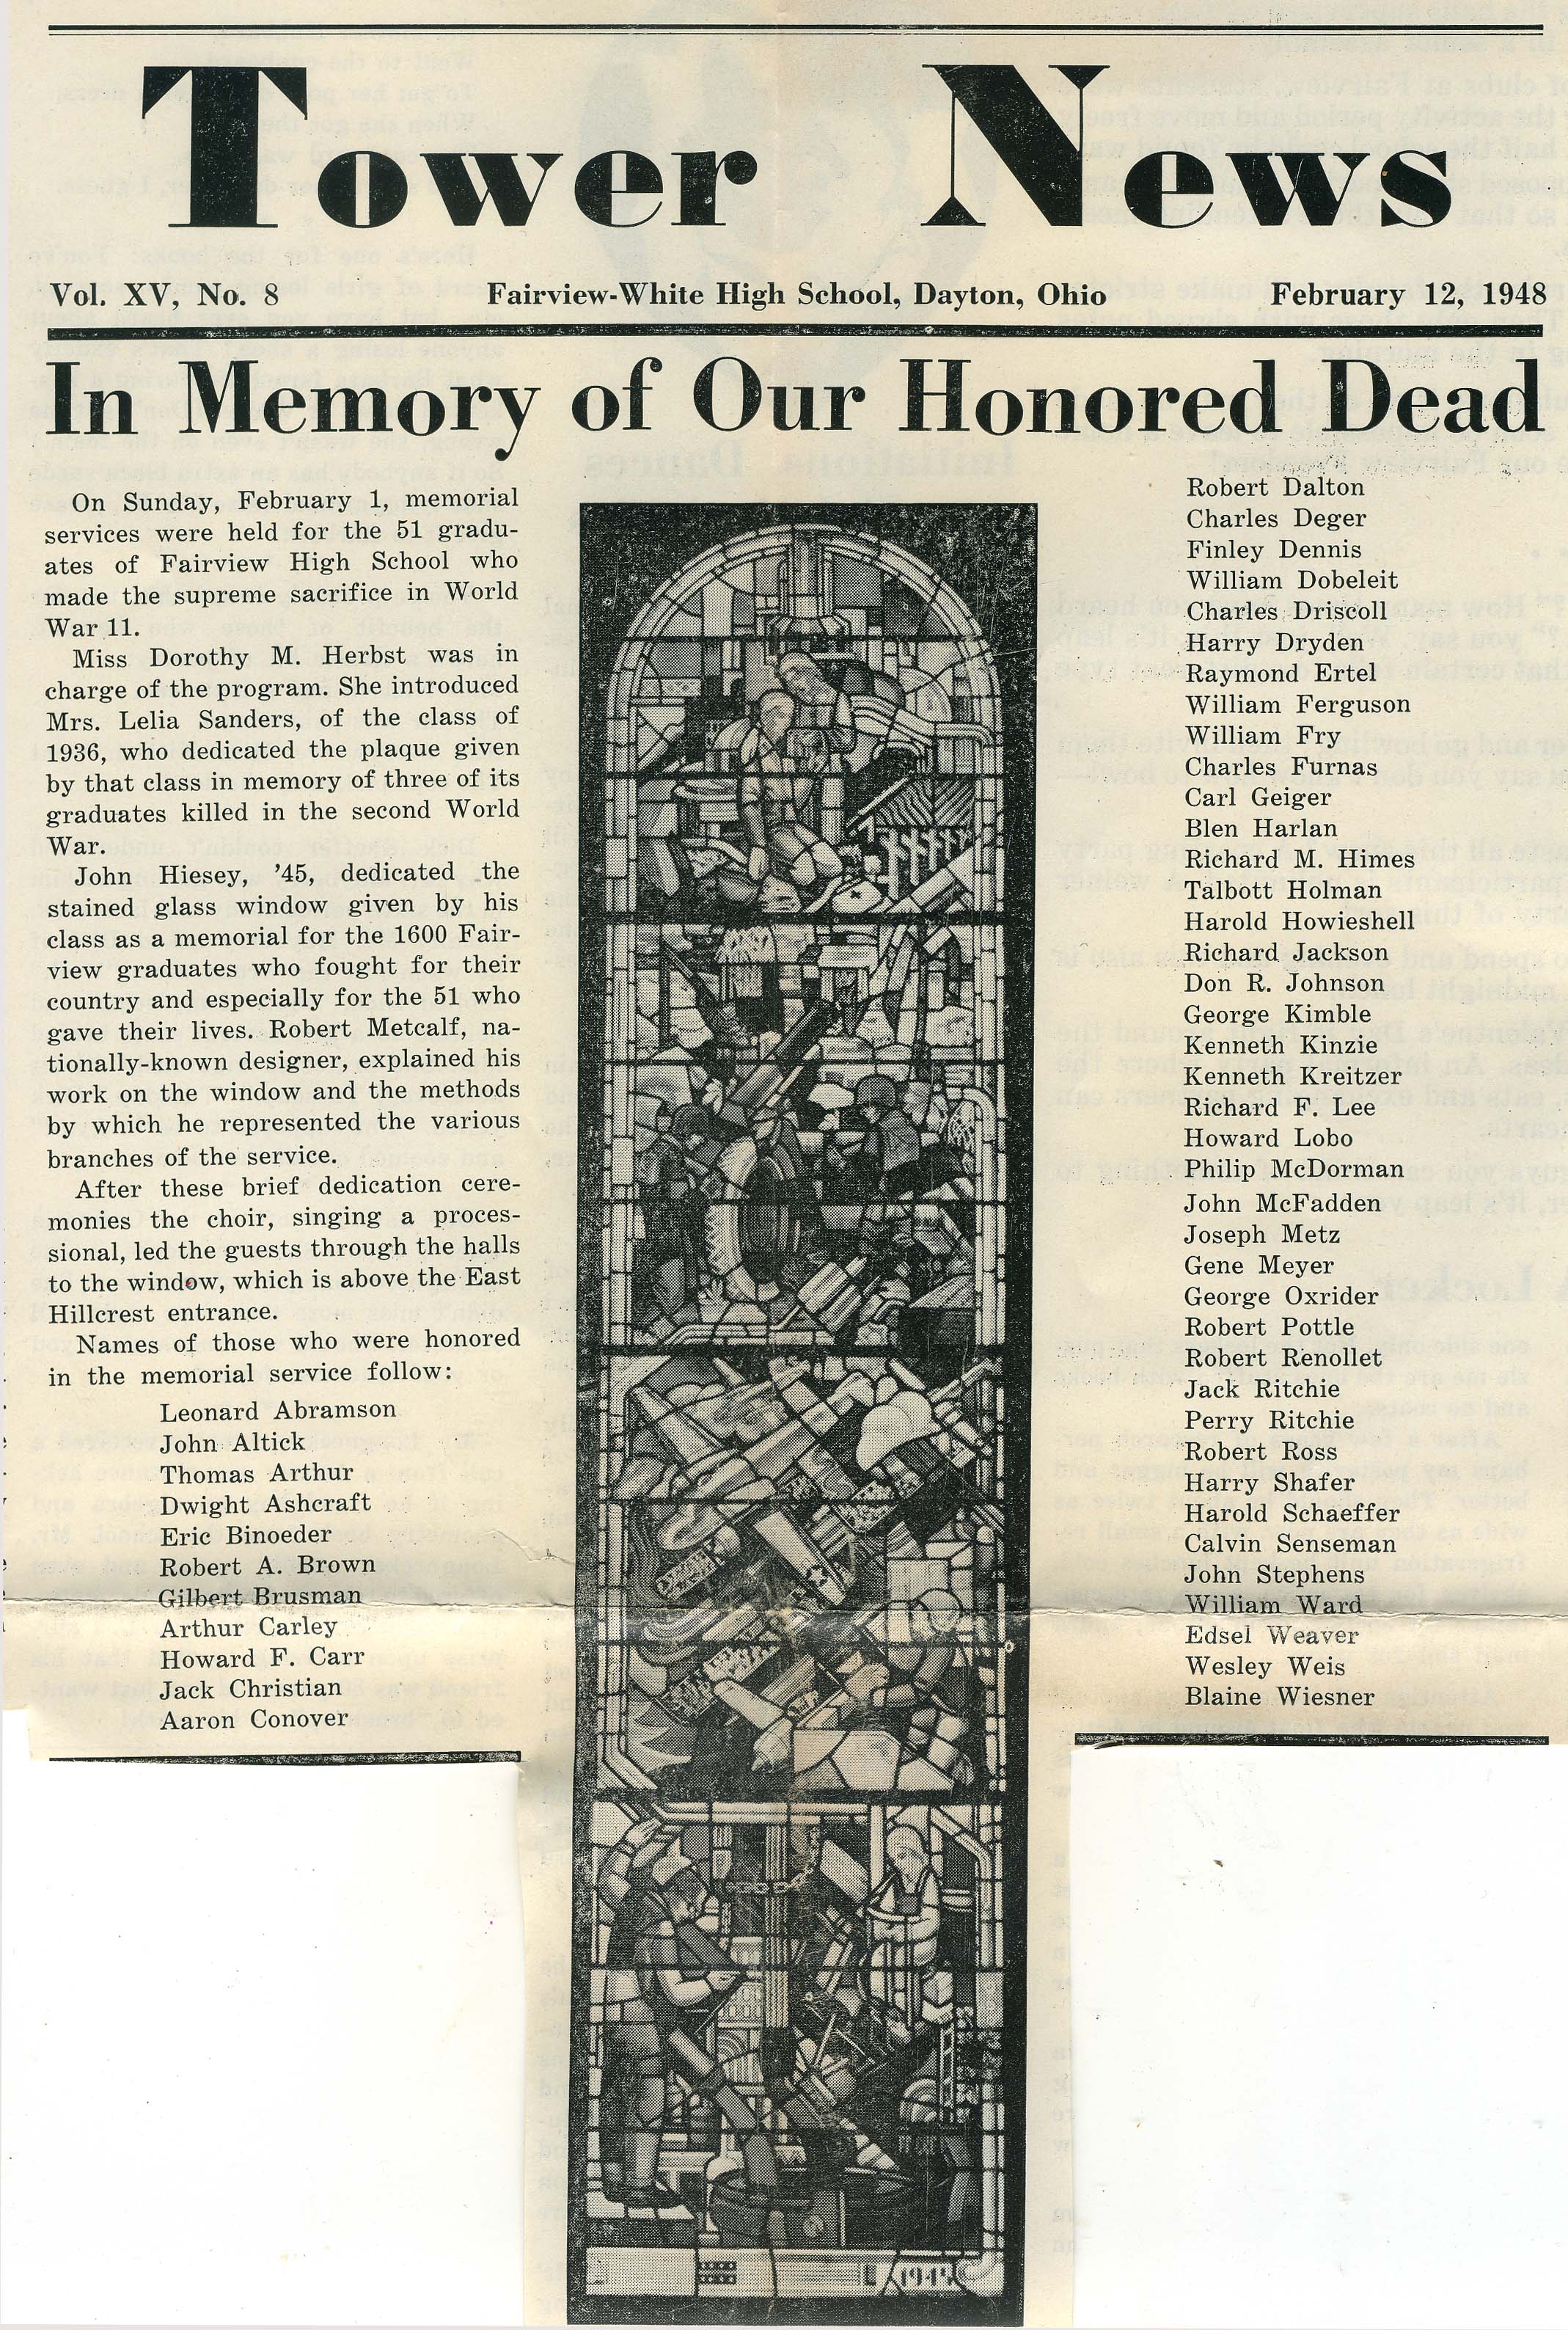 This 1948 Tower News  article includes a list of the alumni from Fairview High School who made the supreme sacrifice in World War II. (Image provided by Virginia Burroughs) More information about the stained glass window dedicated to these alumni can be f